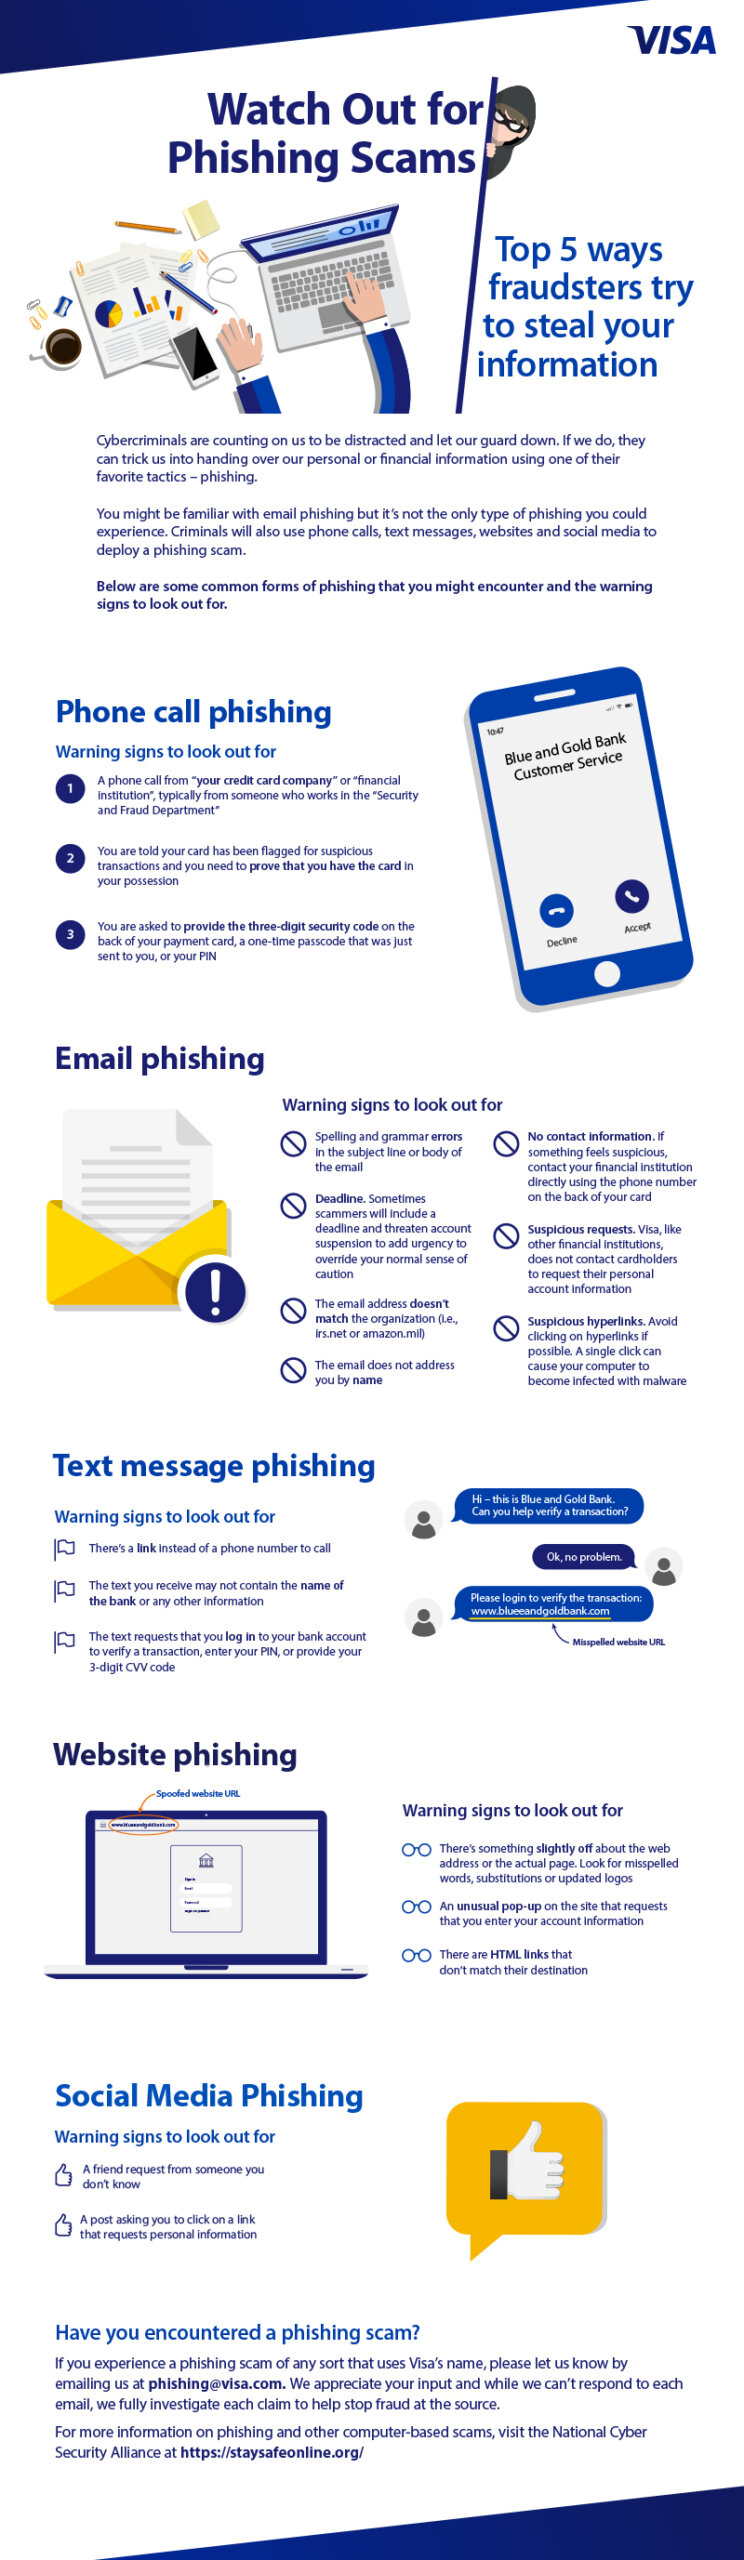 VISA infographic about phishing scams.